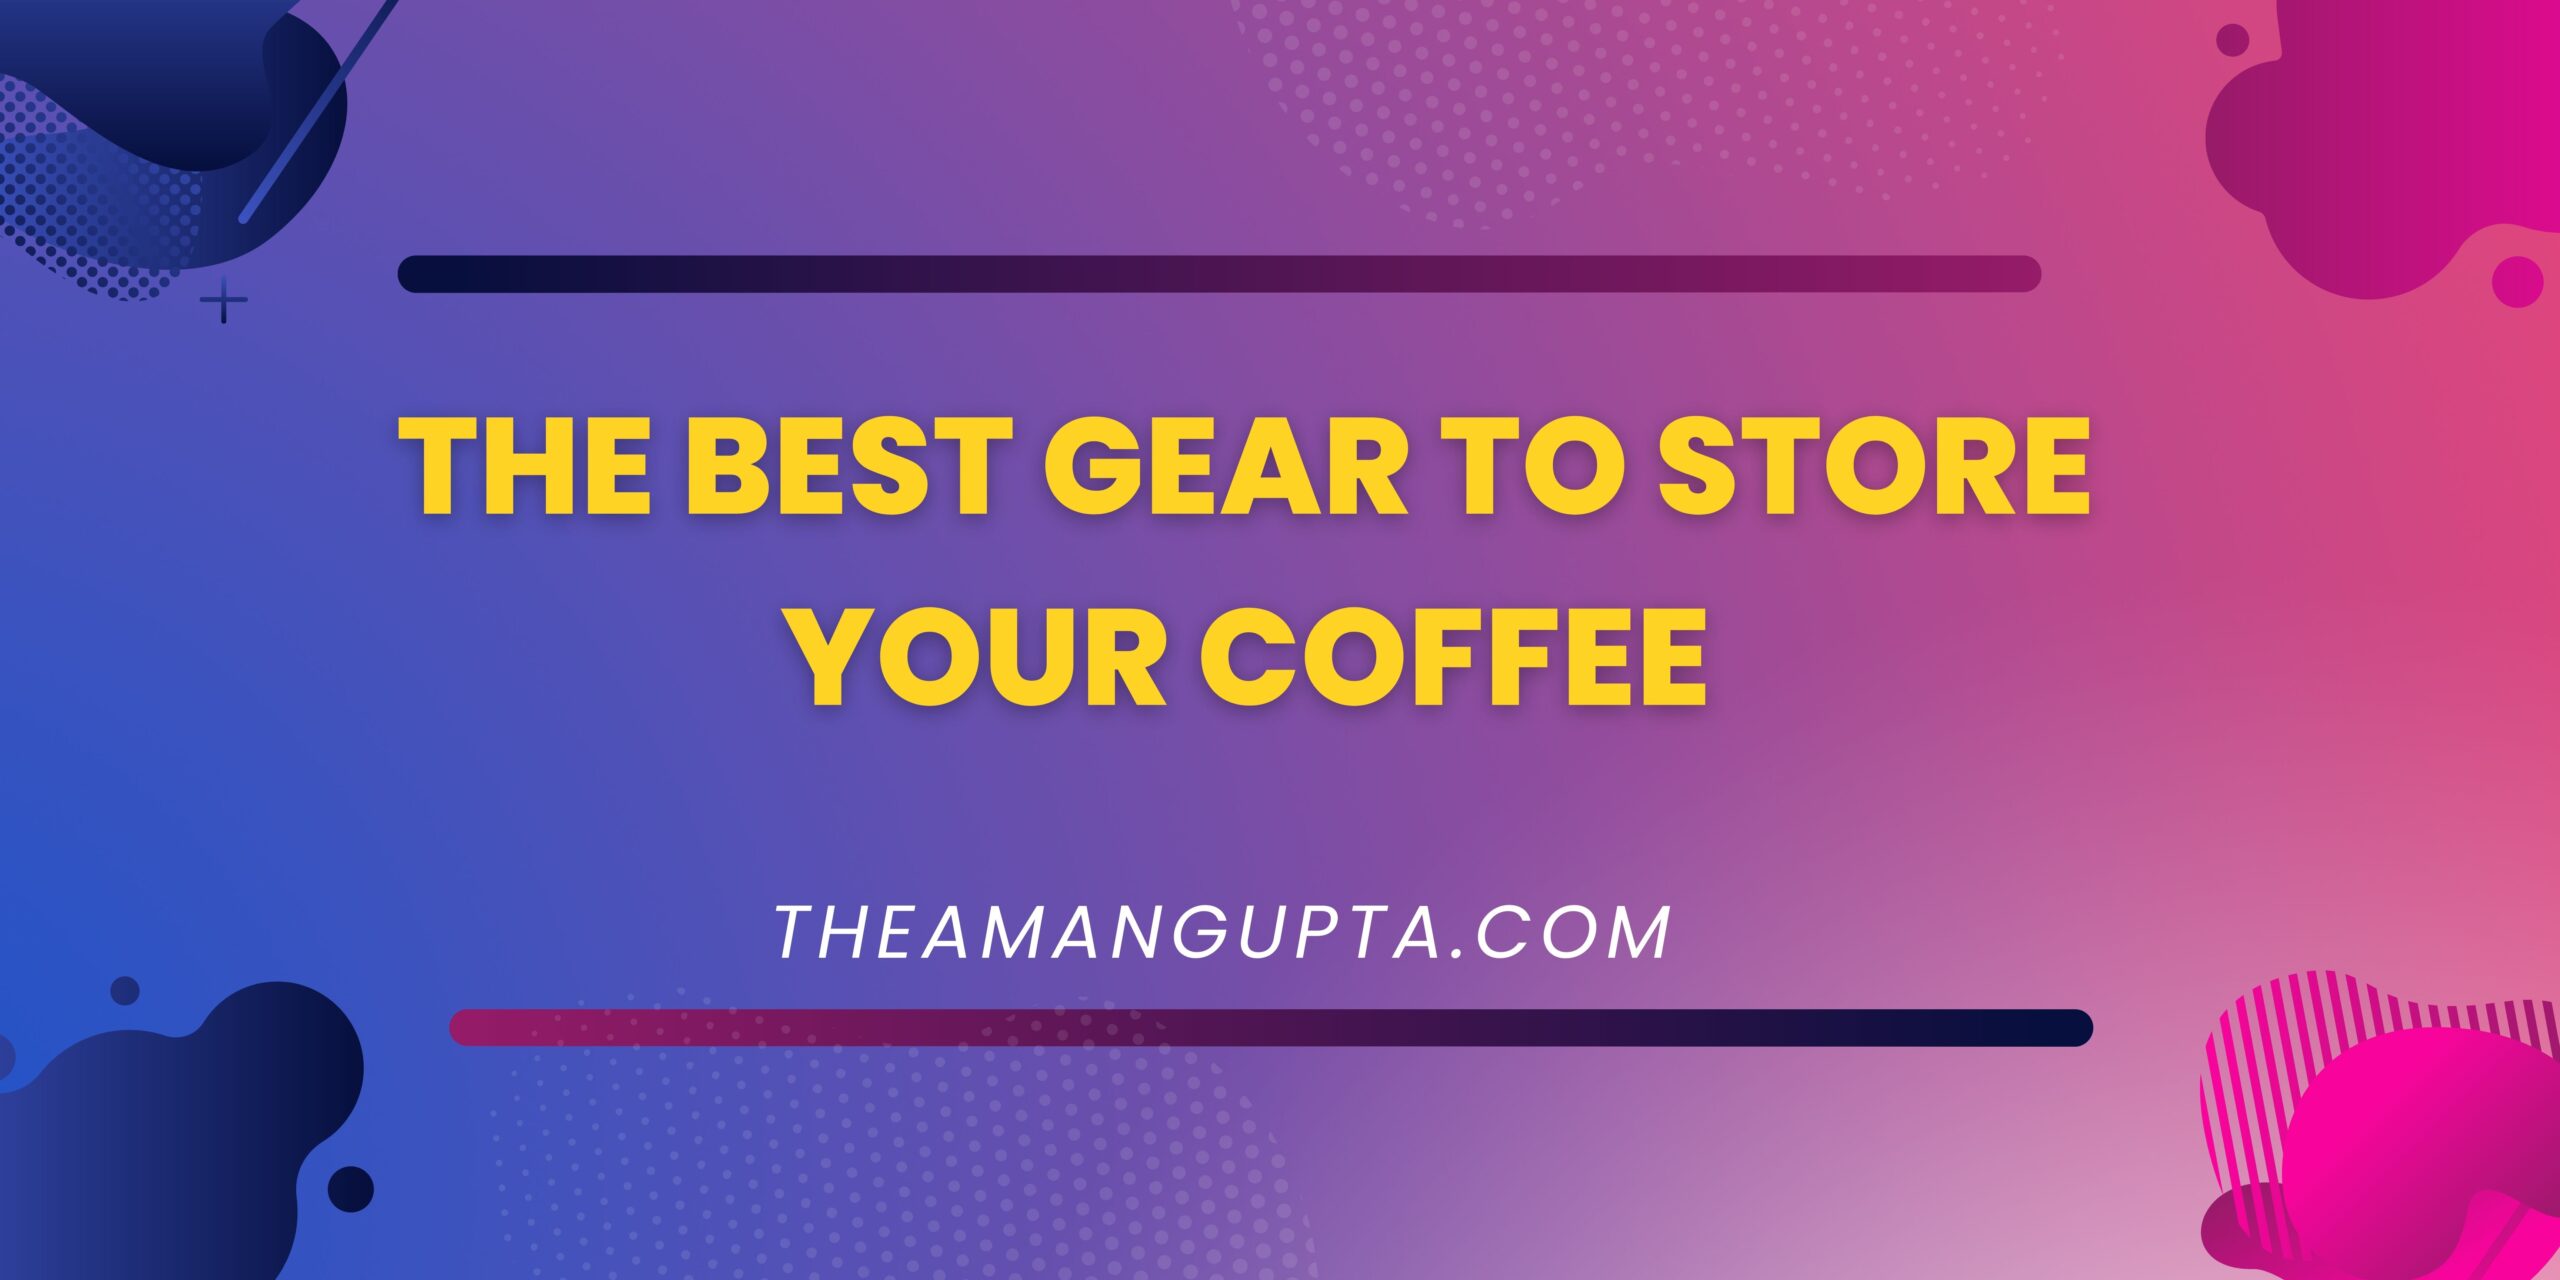 The Best Gear for Storing Your Coffee|Coffee|Theamangupta|Theamangupta